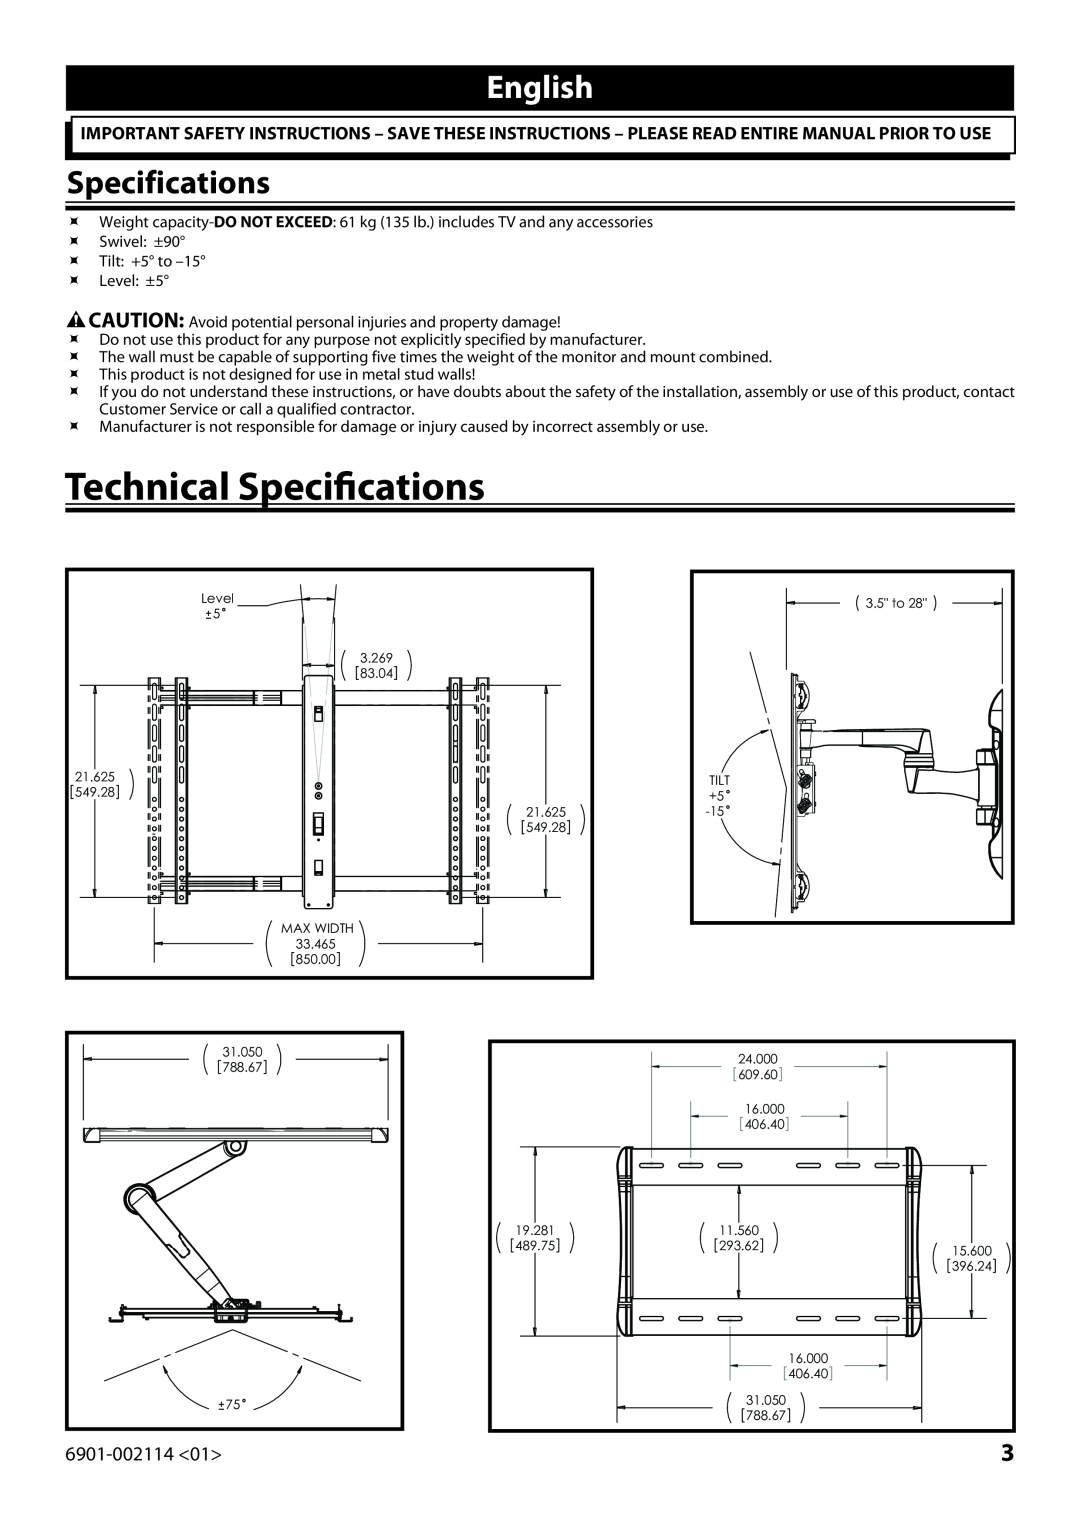 Sanus Systems LF228 instruction manual English, Technical Specifications, 6901-002114 